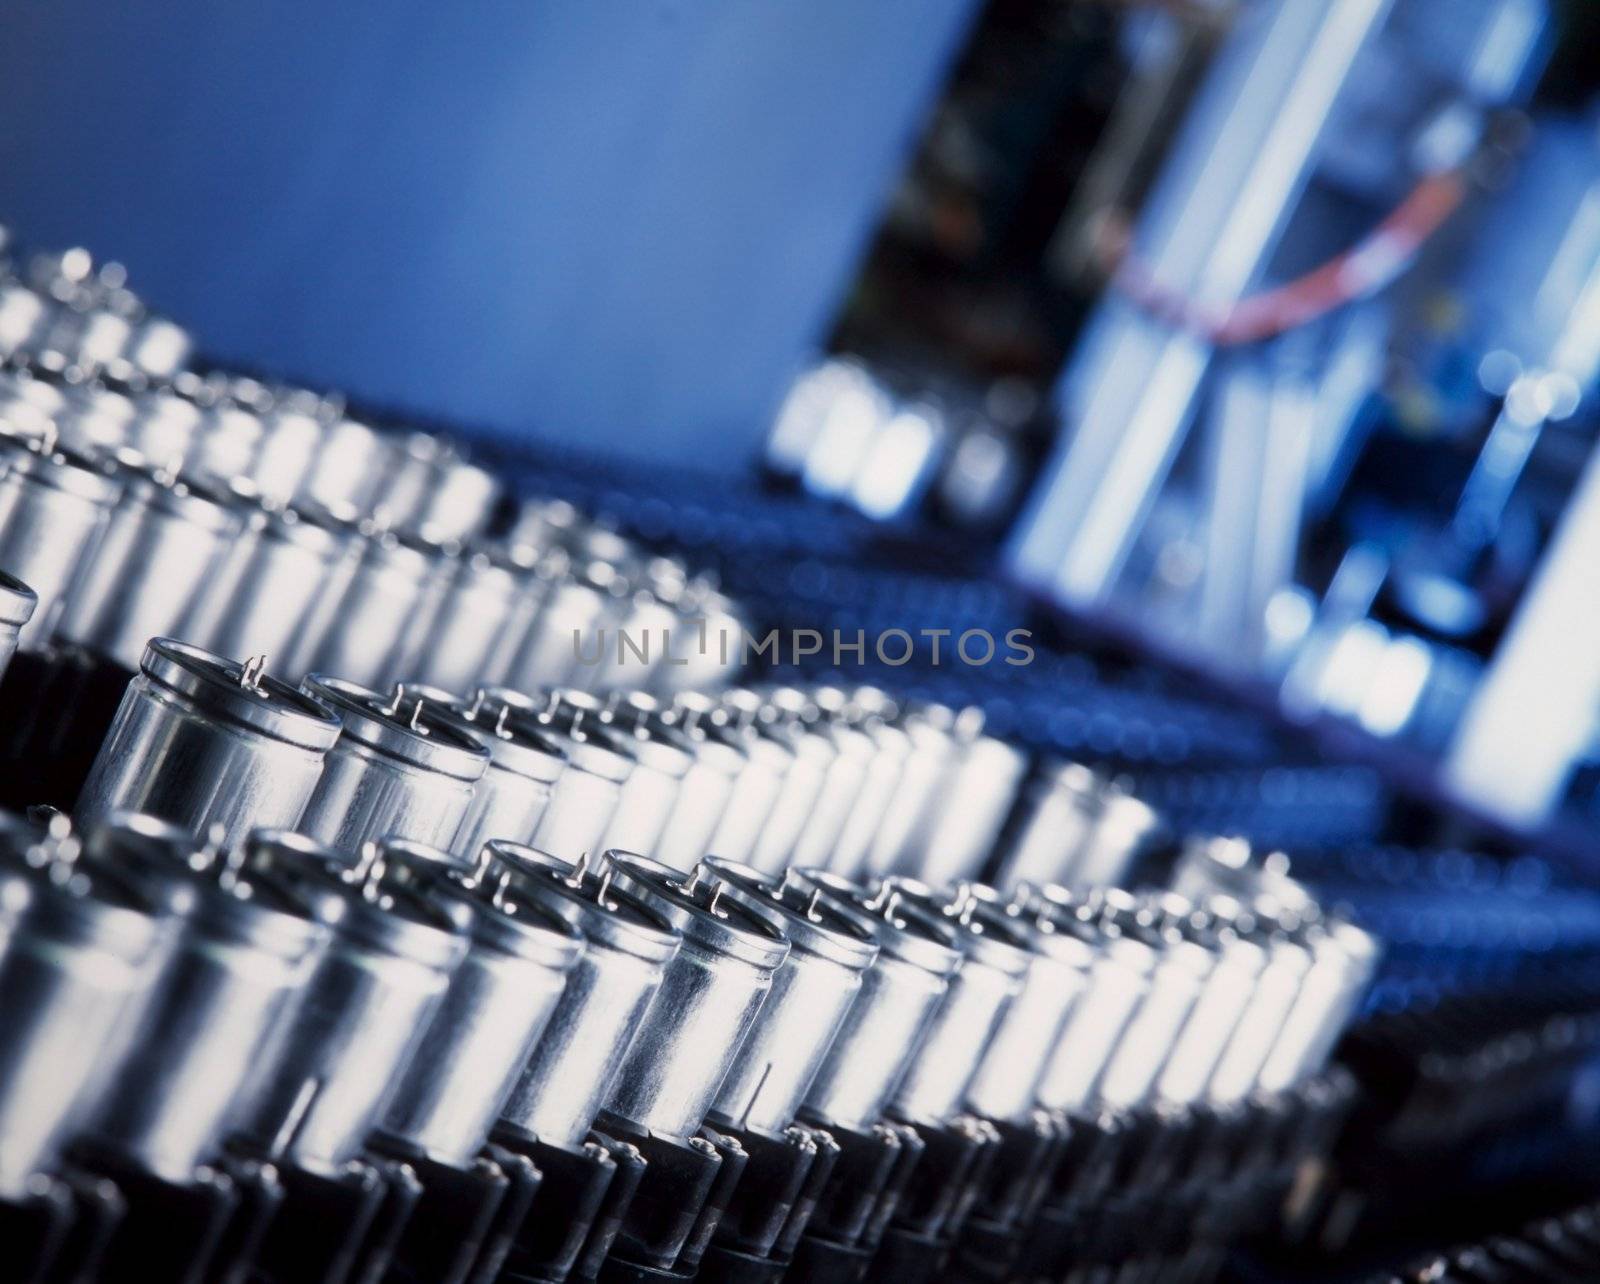 capacitor production by RainerPlendl